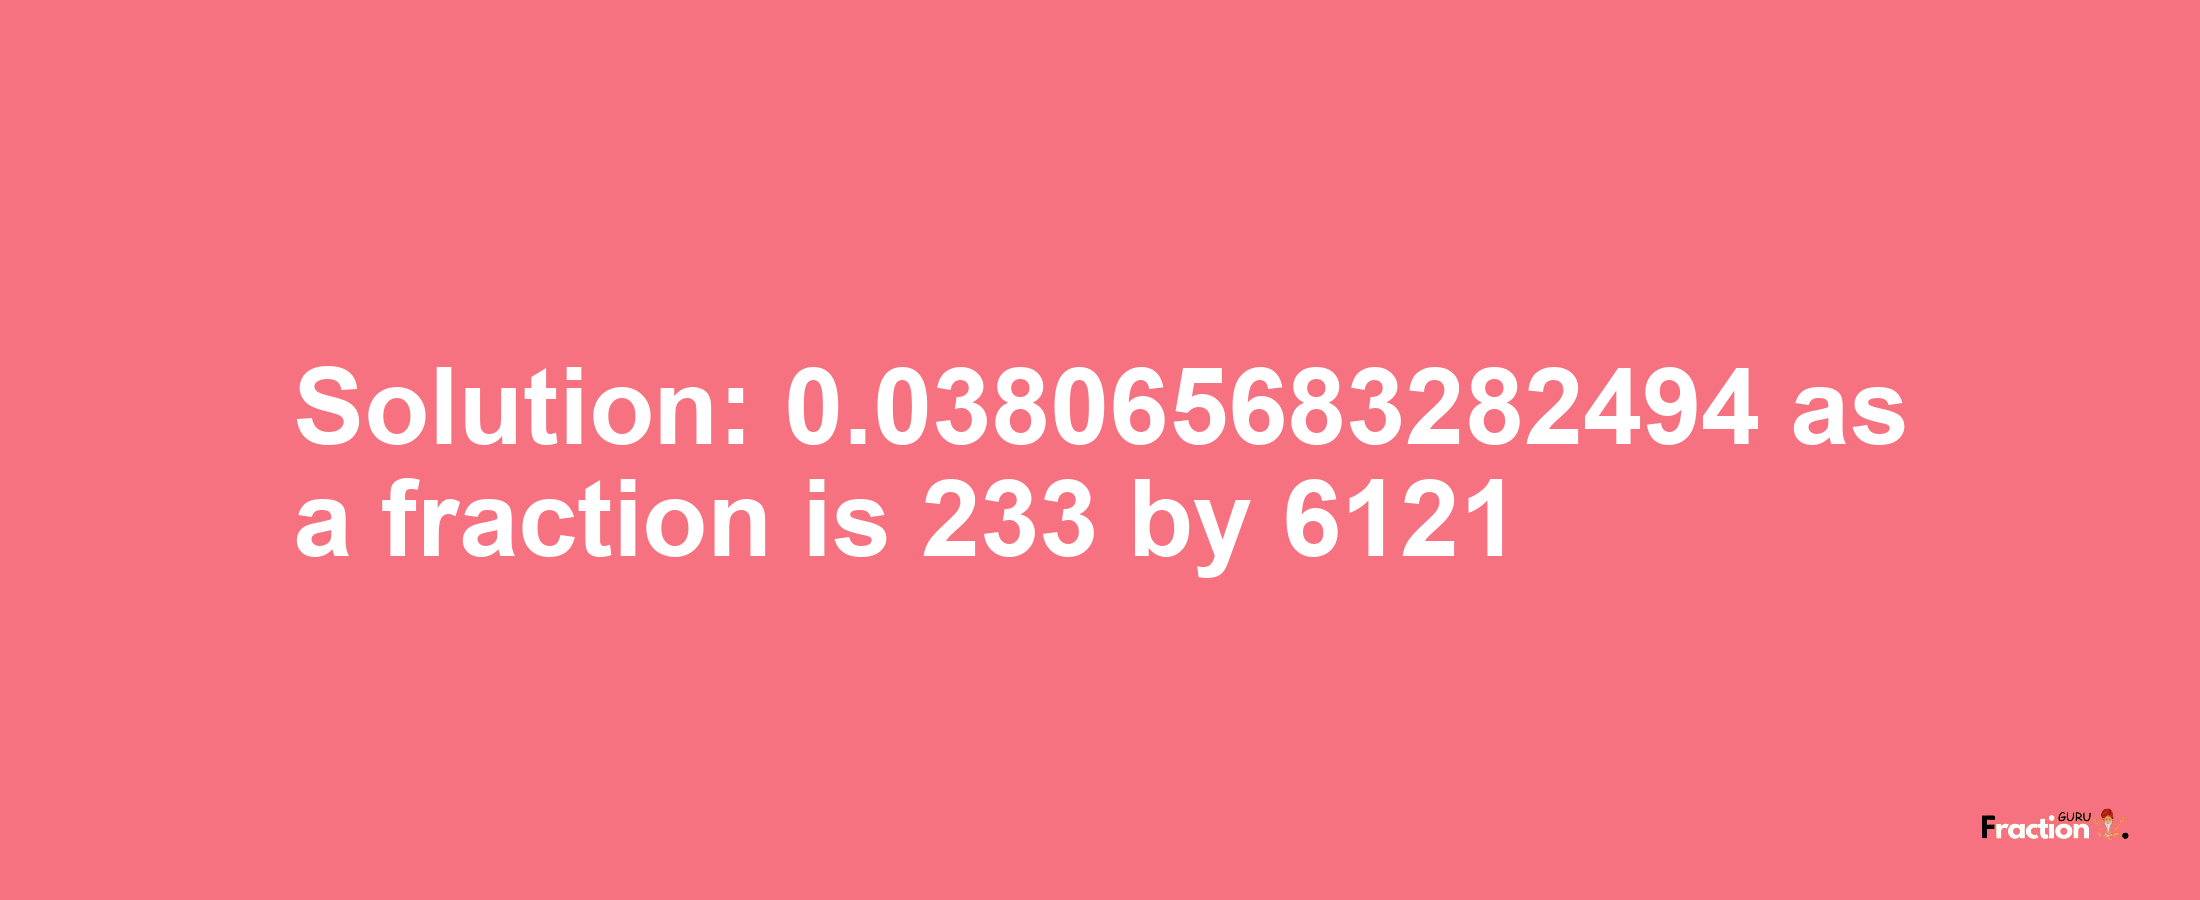 Solution:0.038065683282494 as a fraction is 233/6121